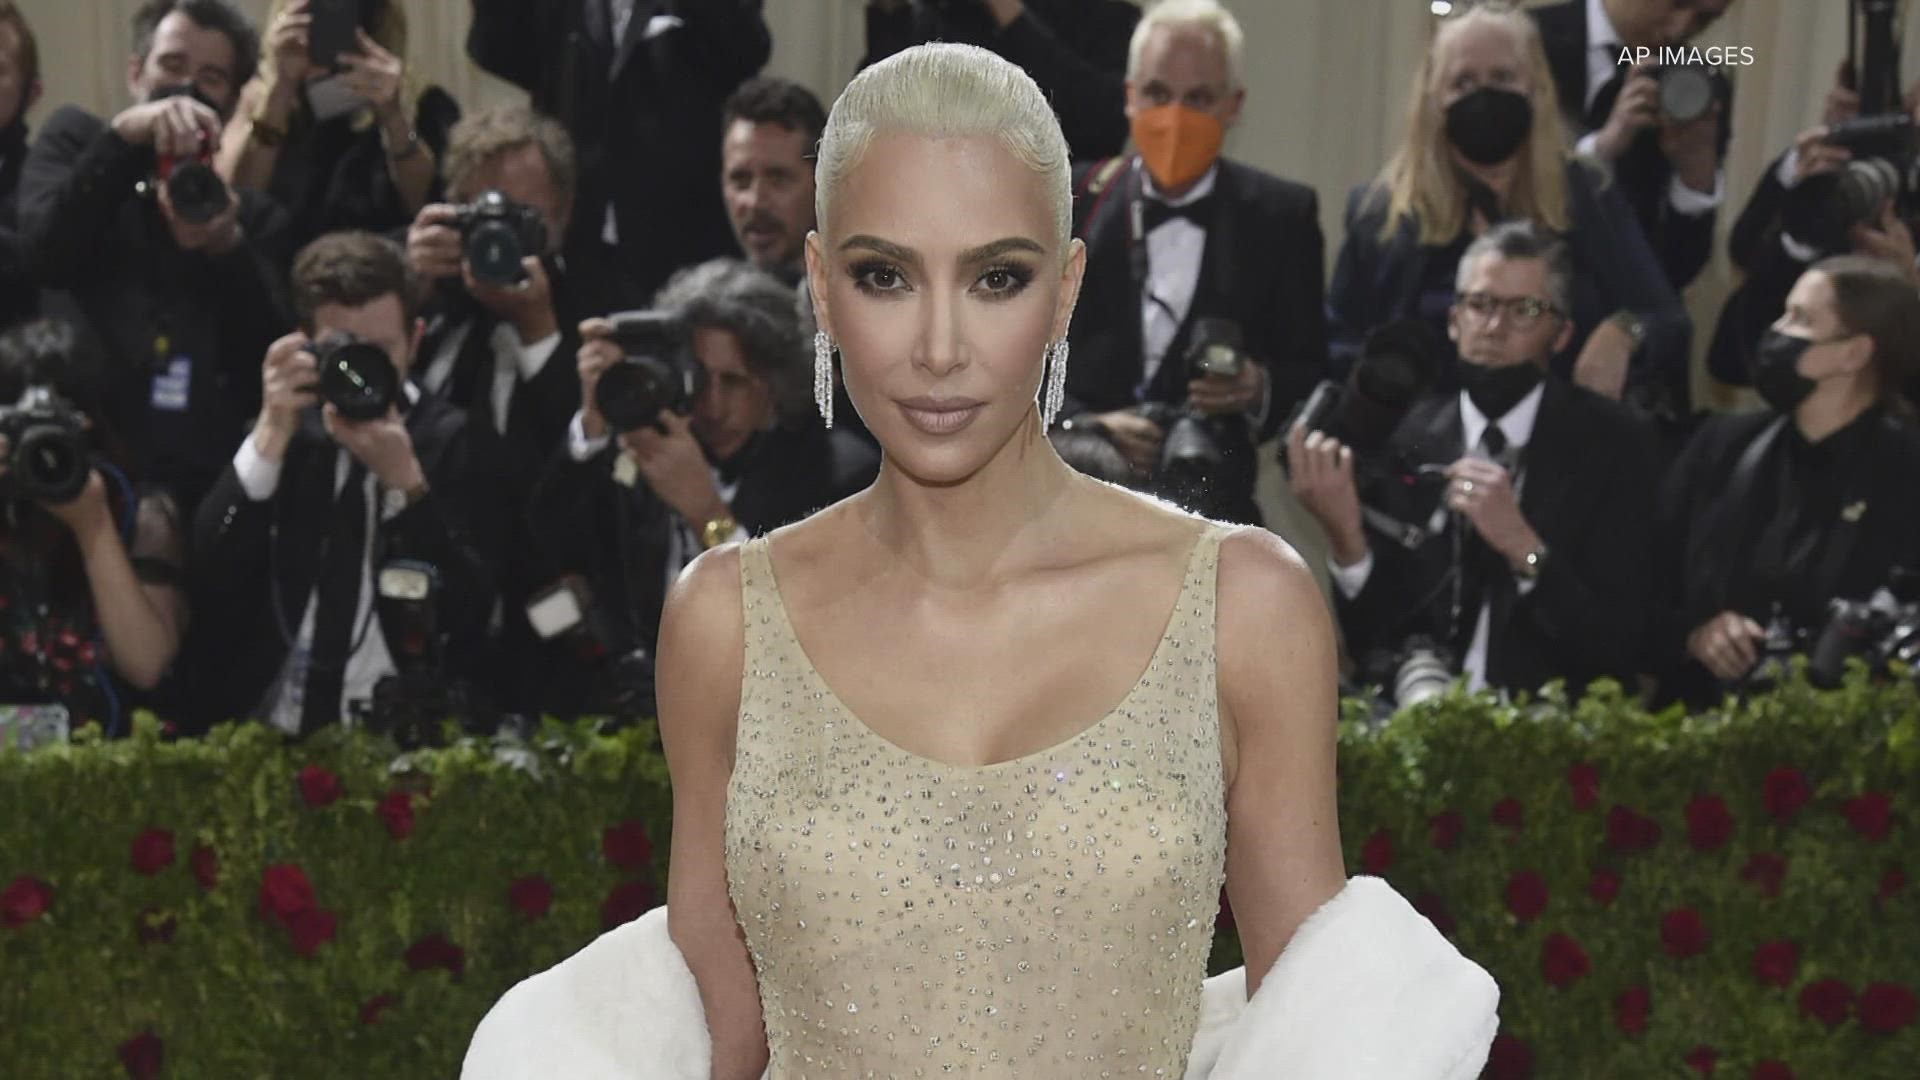 The SEC alleges Kim Kardashian failed to disclose she was paid more than $250K to post an Instagram about crypto asset security.